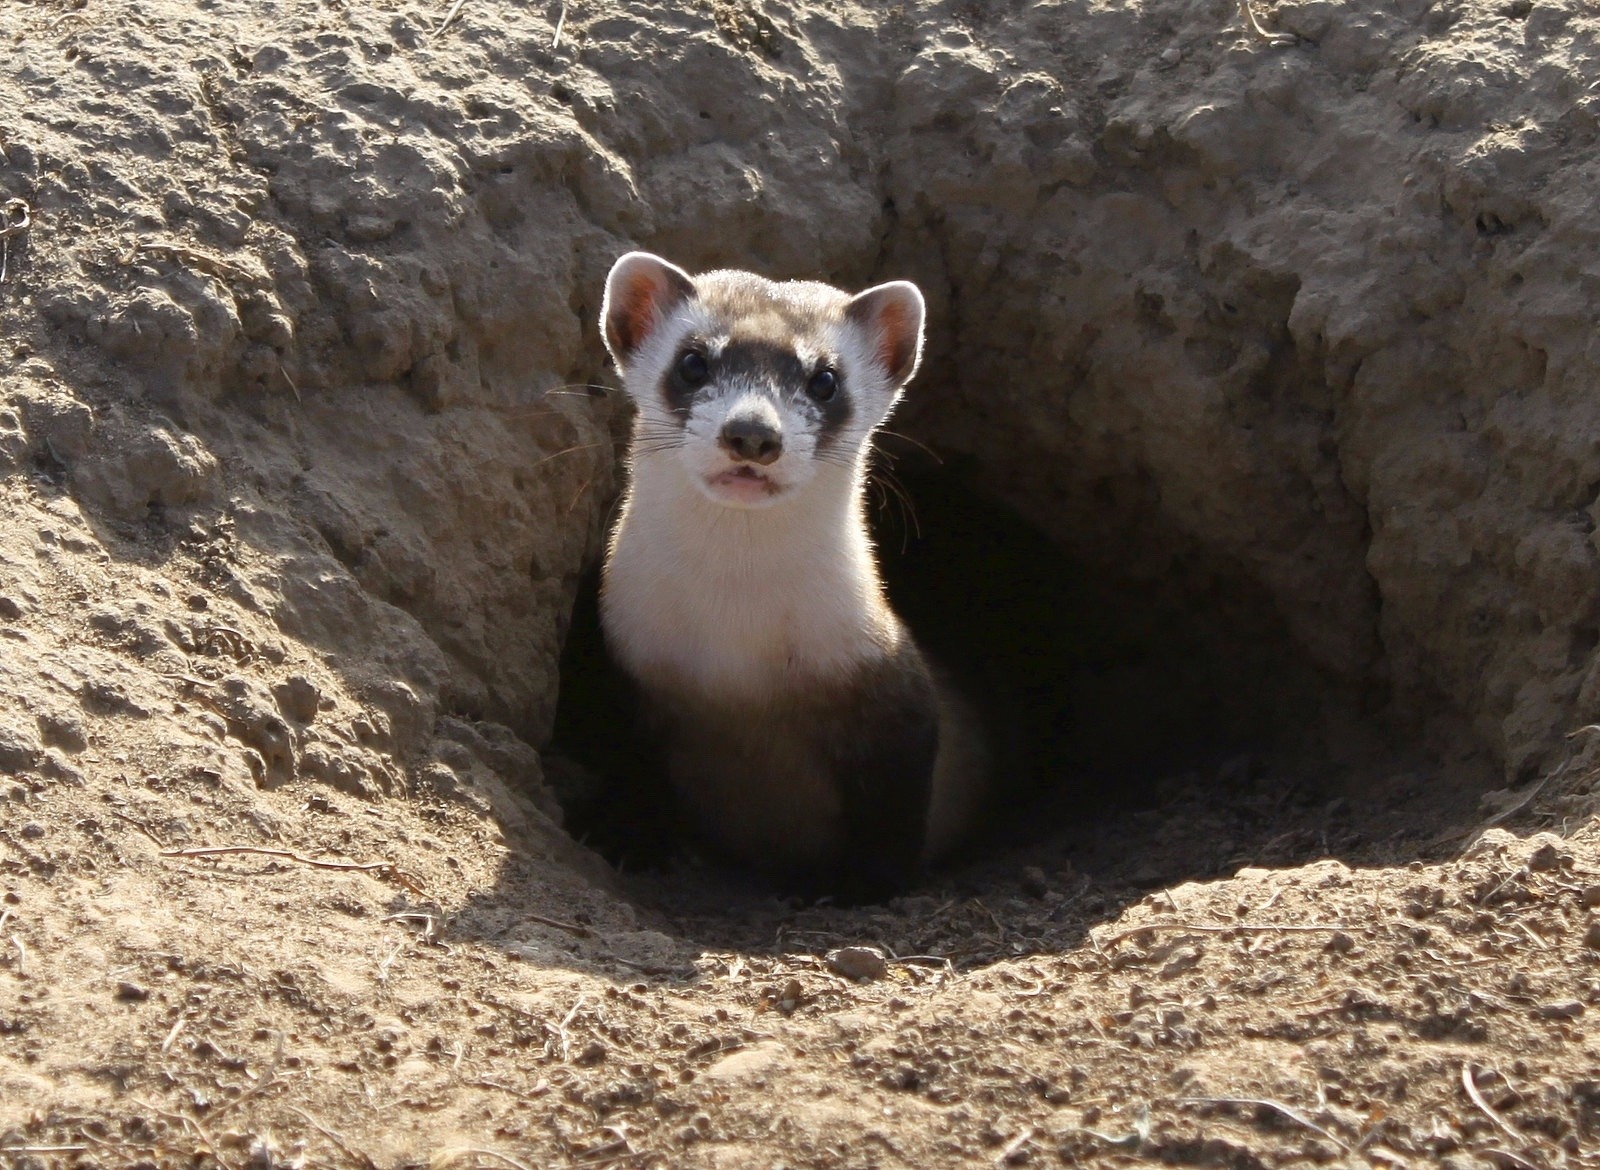 The black-footed ferret is the most critically-endangered land mammal in North America. Once thought extinct, a tiny population was discovered decades ago on a ranch near Meteetse, Wyoming and the animals were brought into captivity. Thanks to the Endangered Species Act, black-footed ferrets are getting a second chance in the wild. They depend on prairie dogs to survive but prairie dogs remain targets of annihilation in the West.  Photo courtesy Ryan Moehring/US Fish and Wildlife Service